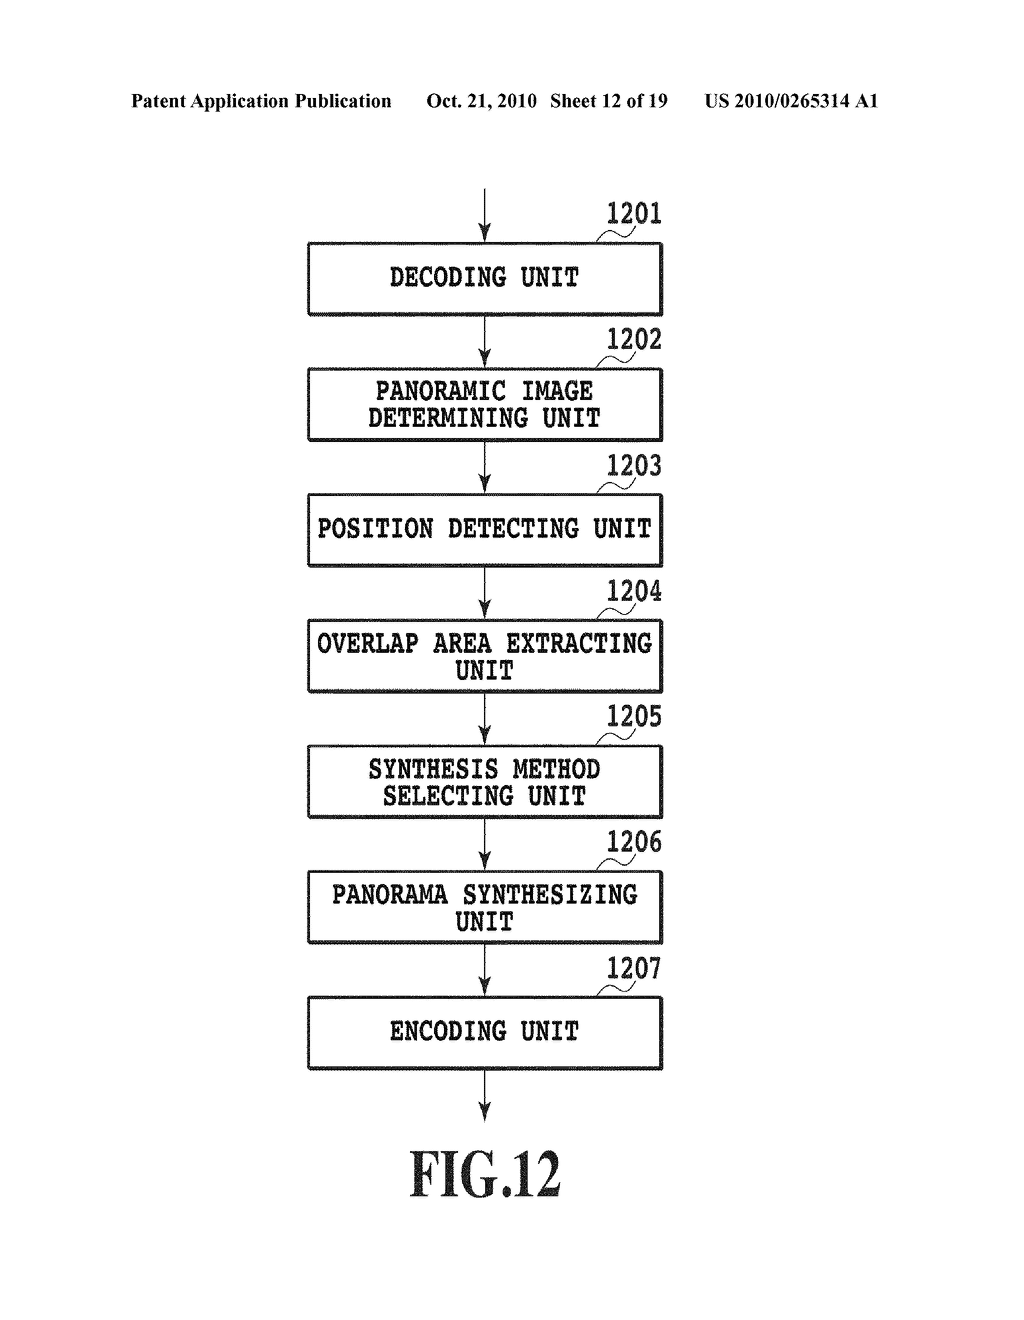 IMAGE PROCESSING APPARATUS AND IMAGE PROCESSING METHOD CAPABLE OF TRANSMISSION/RECEPTION AND RECORDING OF IMAGE FILE OBTAINED BY PANORAMIC IMAGE SHOT - diagram, schematic, and image 13